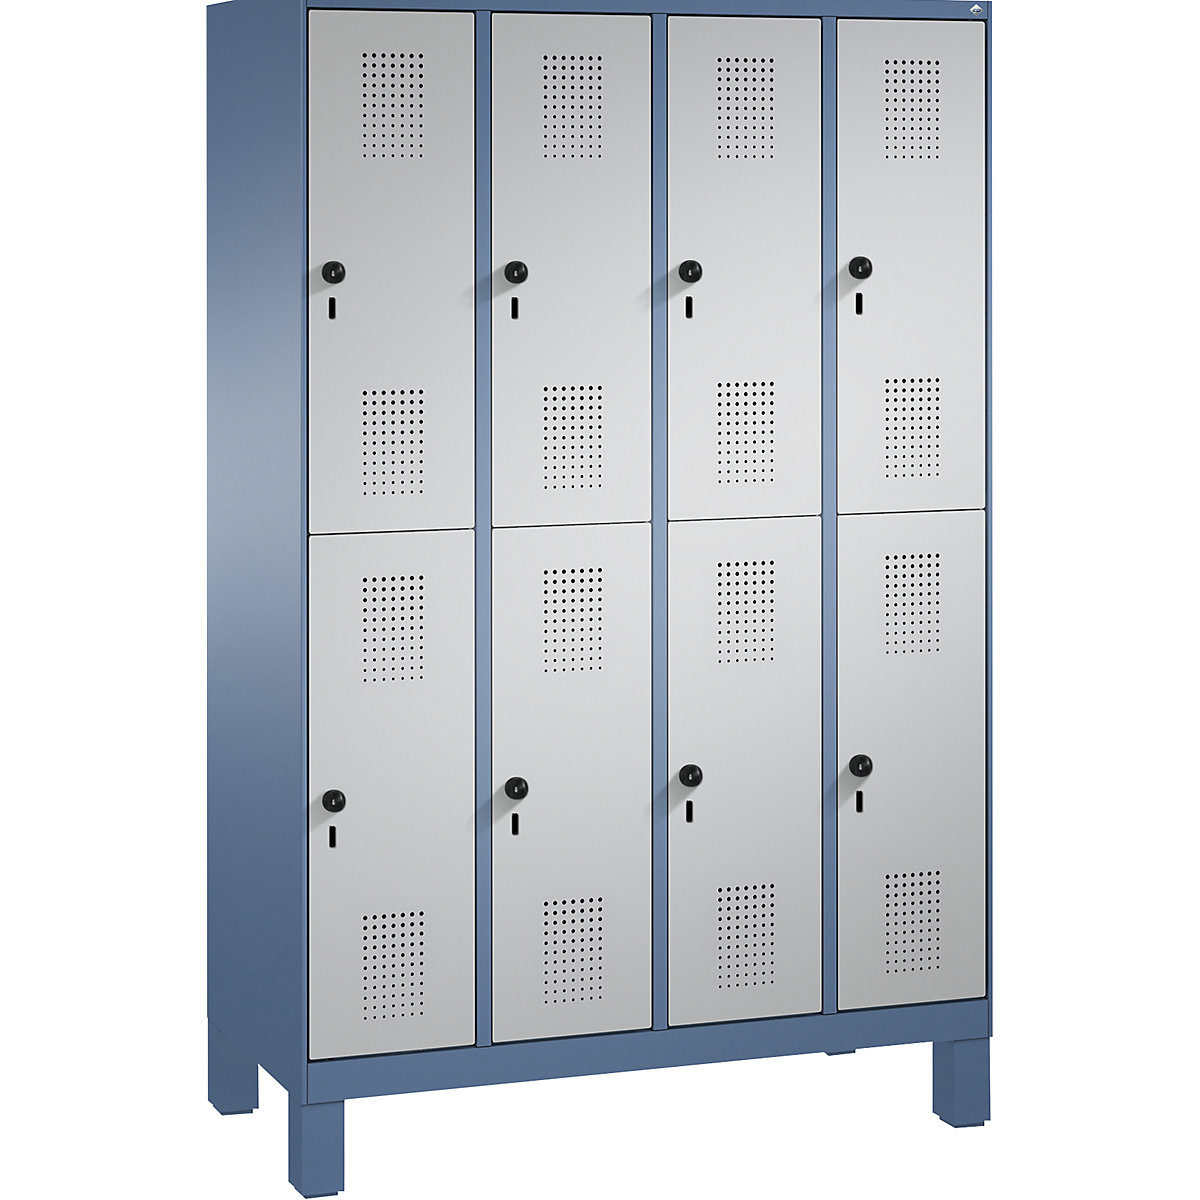 EVOLO cloakroom locker, double tier, with feet – C+P, 4 compartments, 2 shelf compartments each, compartment width 300 mm, distant blue / white aluminium-8